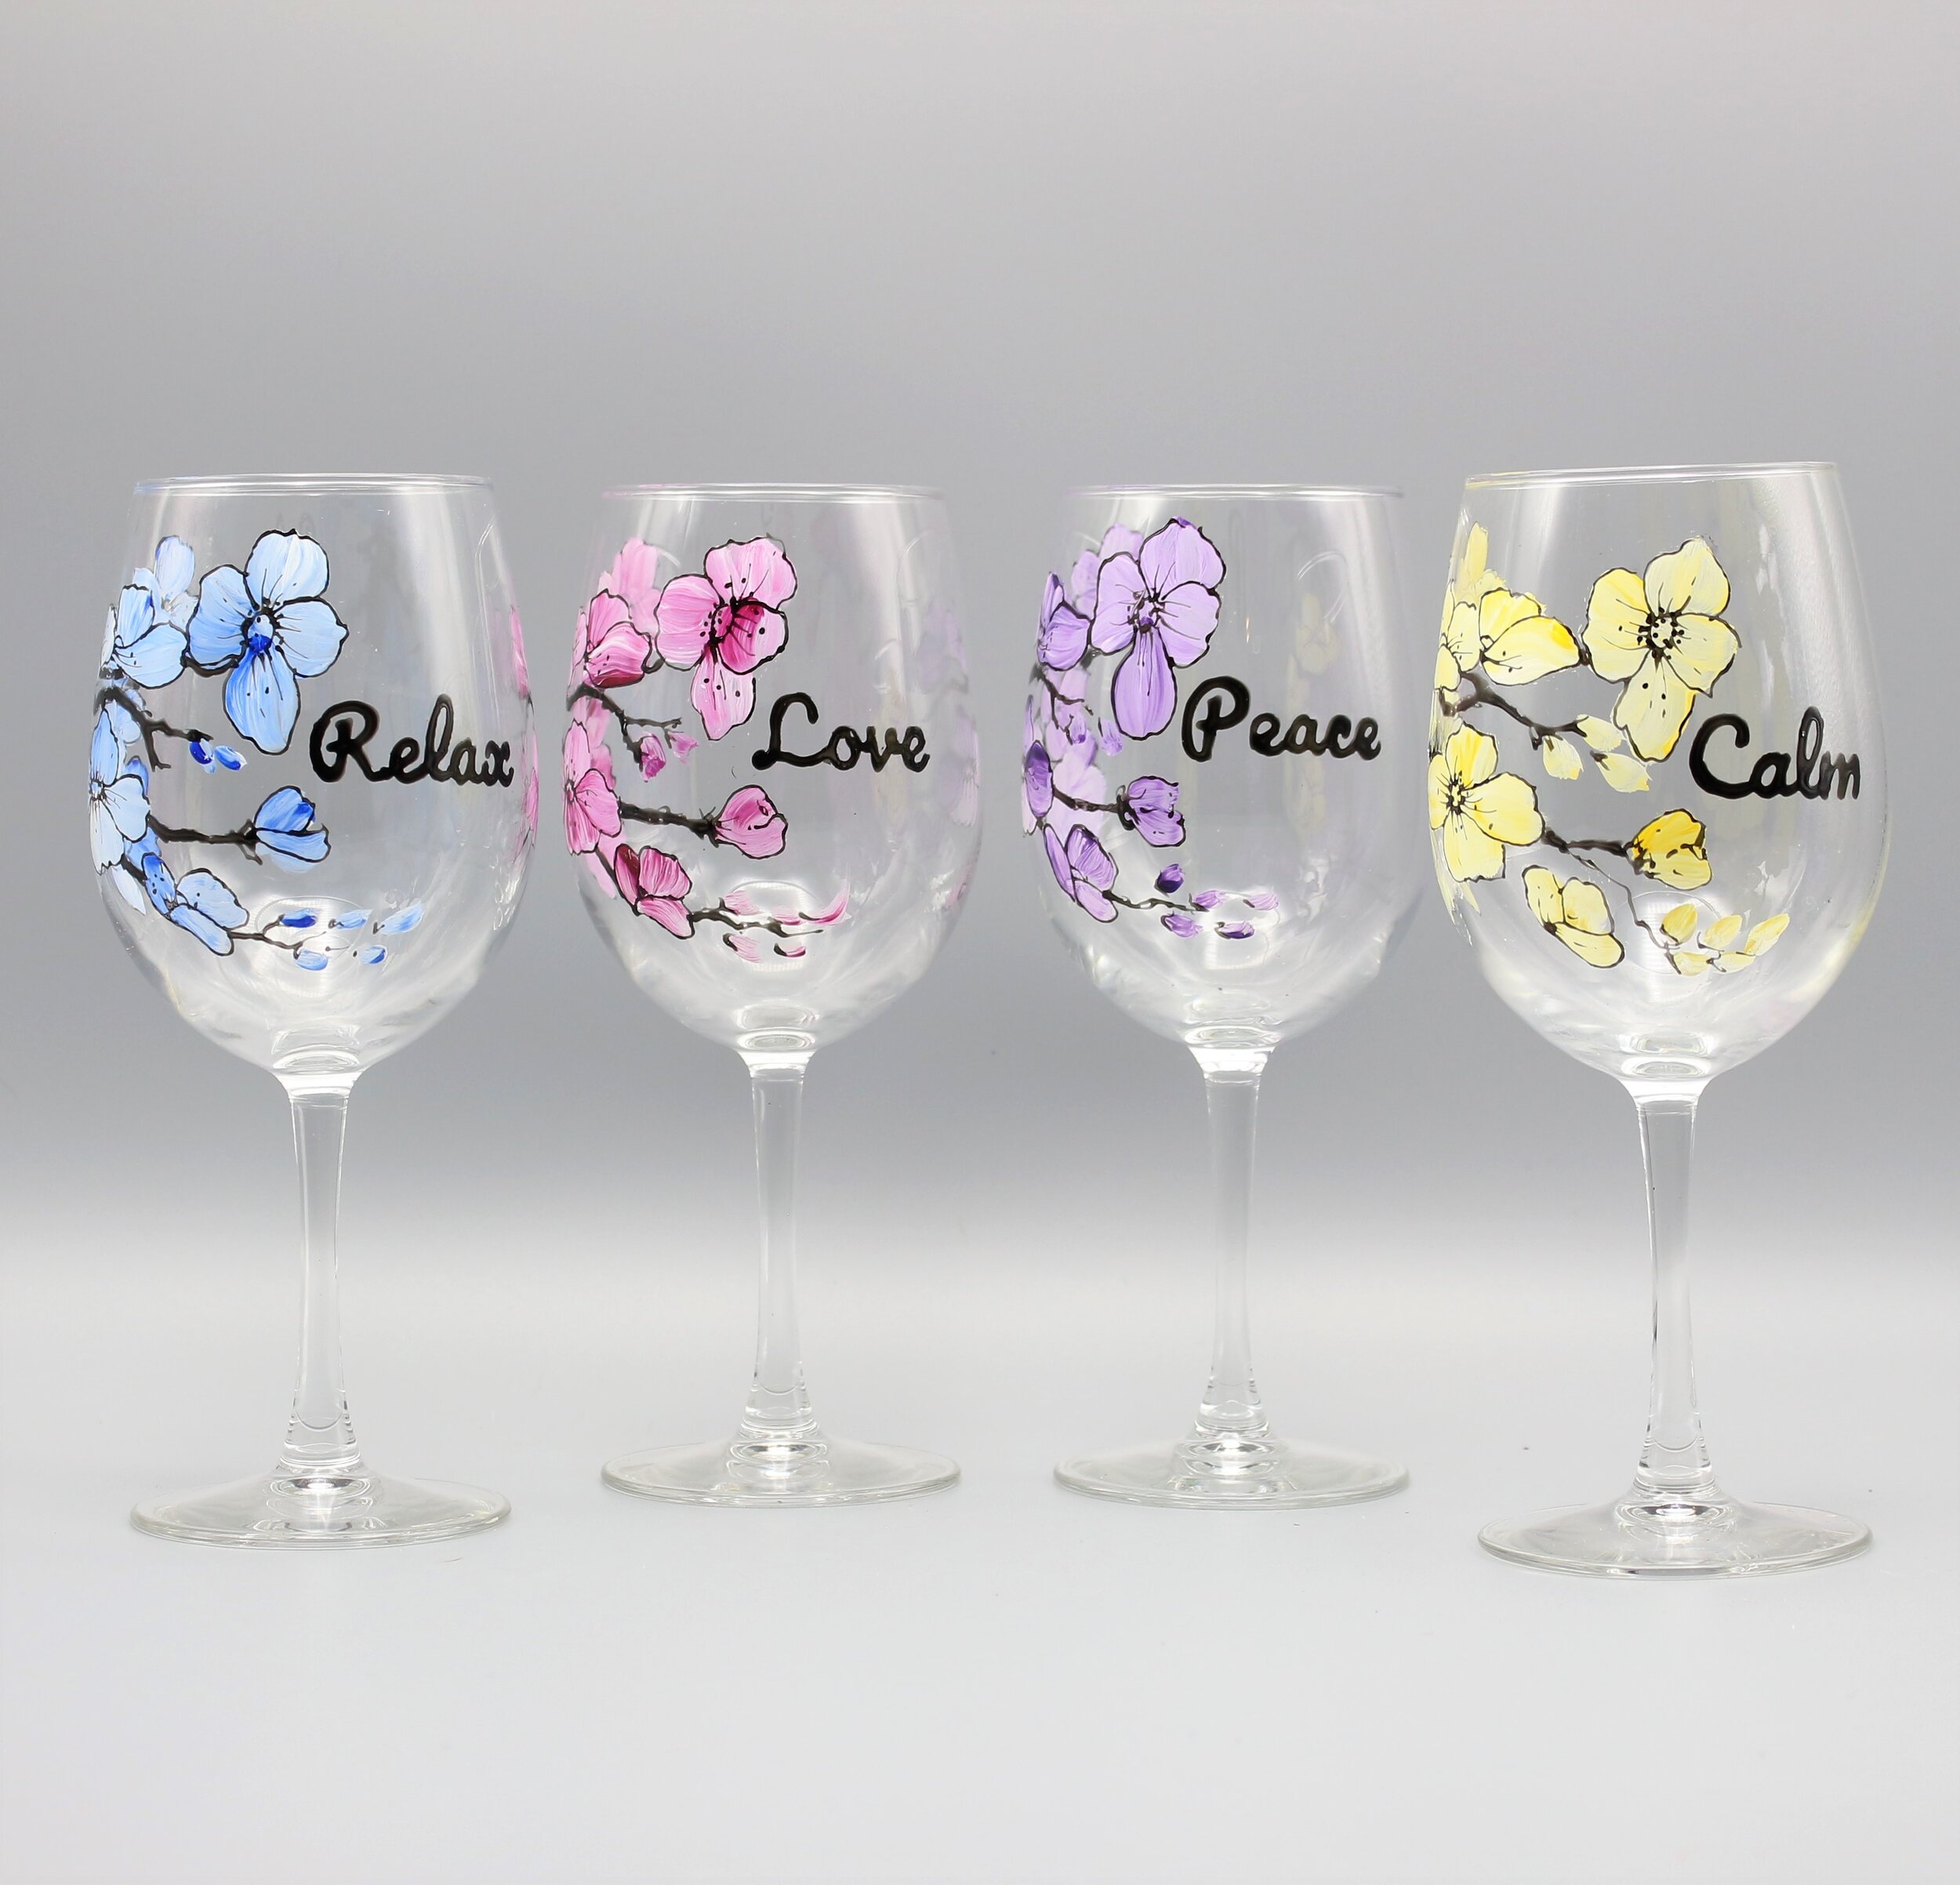 How to paint wine glasses:Wine glass painting ideas & glass painting ideas